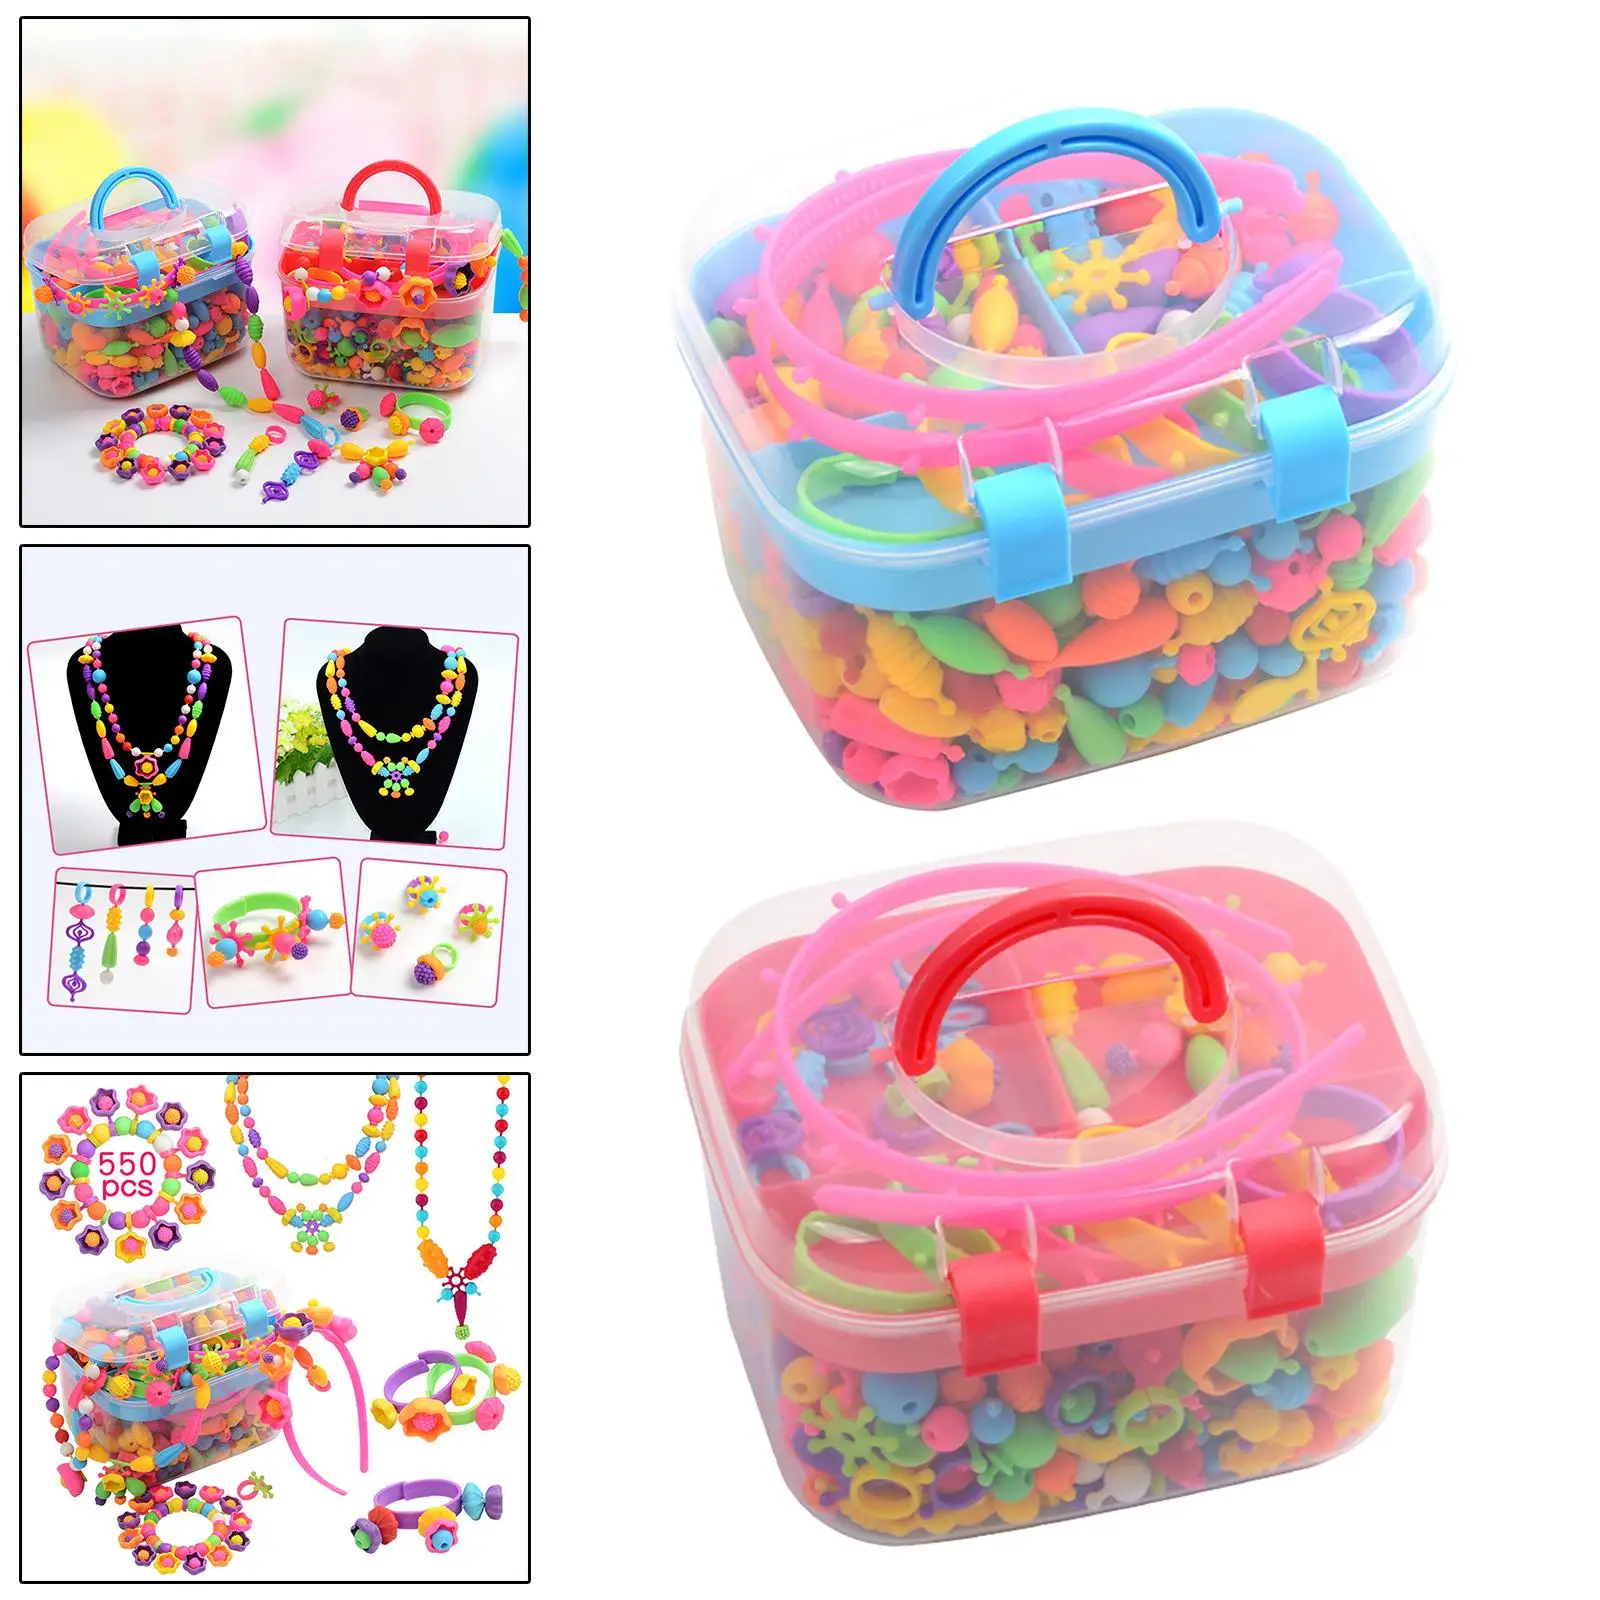 550pcs Pop Beads DIY Kids Jewelry Making Kit Jewelry Set Toys Crafts Arts Snap Together Beads for Hairband Earrings Girls